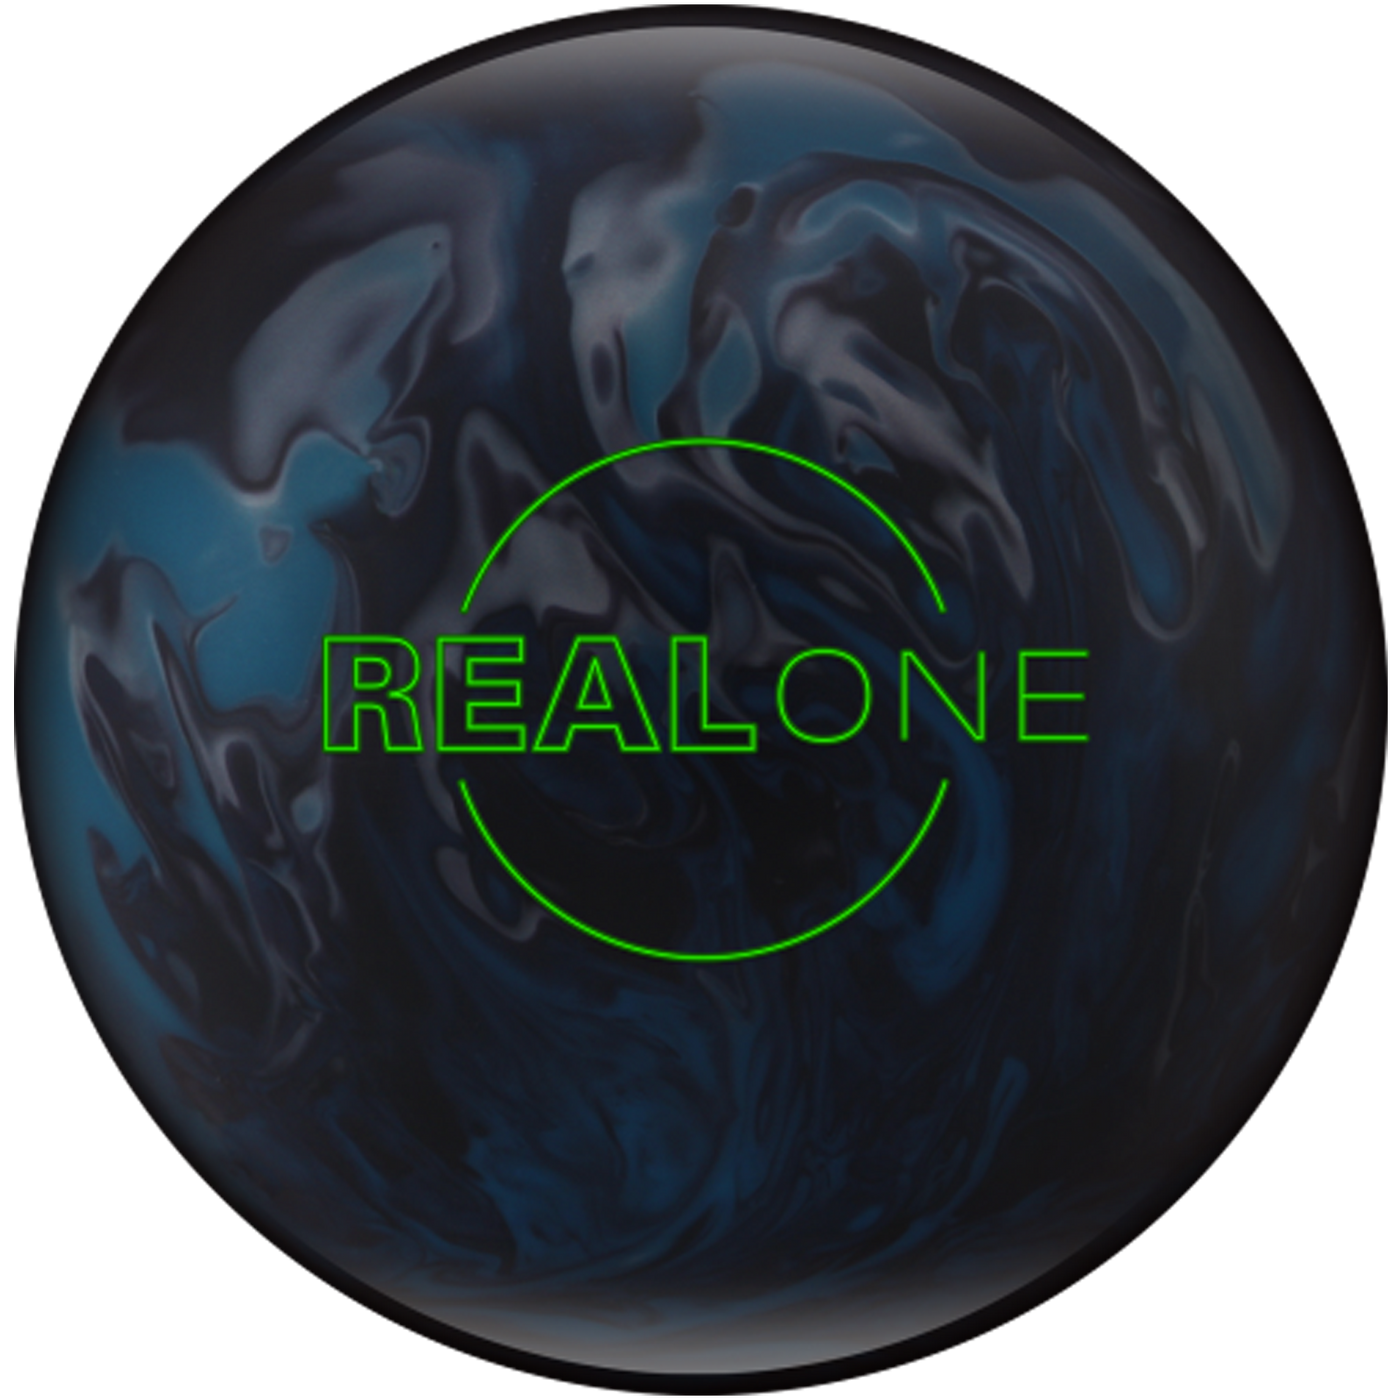 Real One Bowling Ball